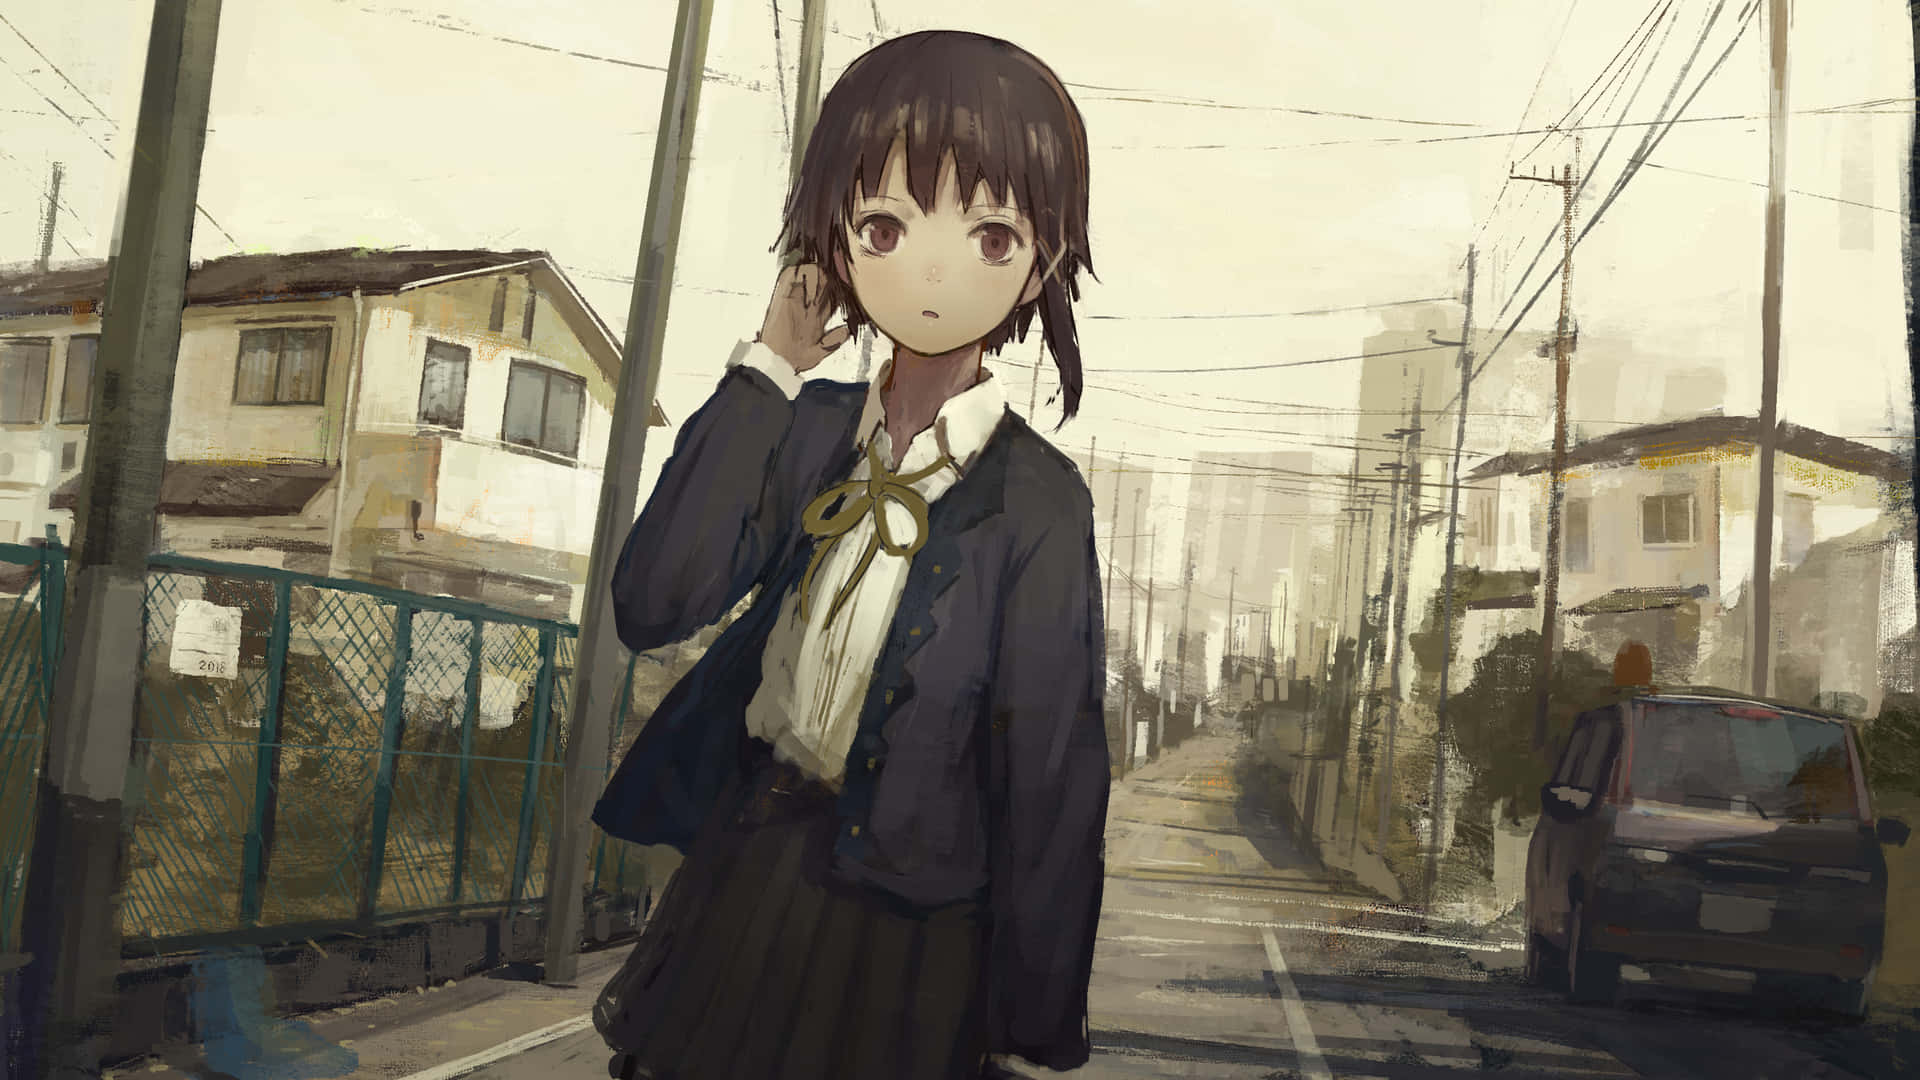 Serial Experiments Lain - “Questioning Reality” Wallpaper